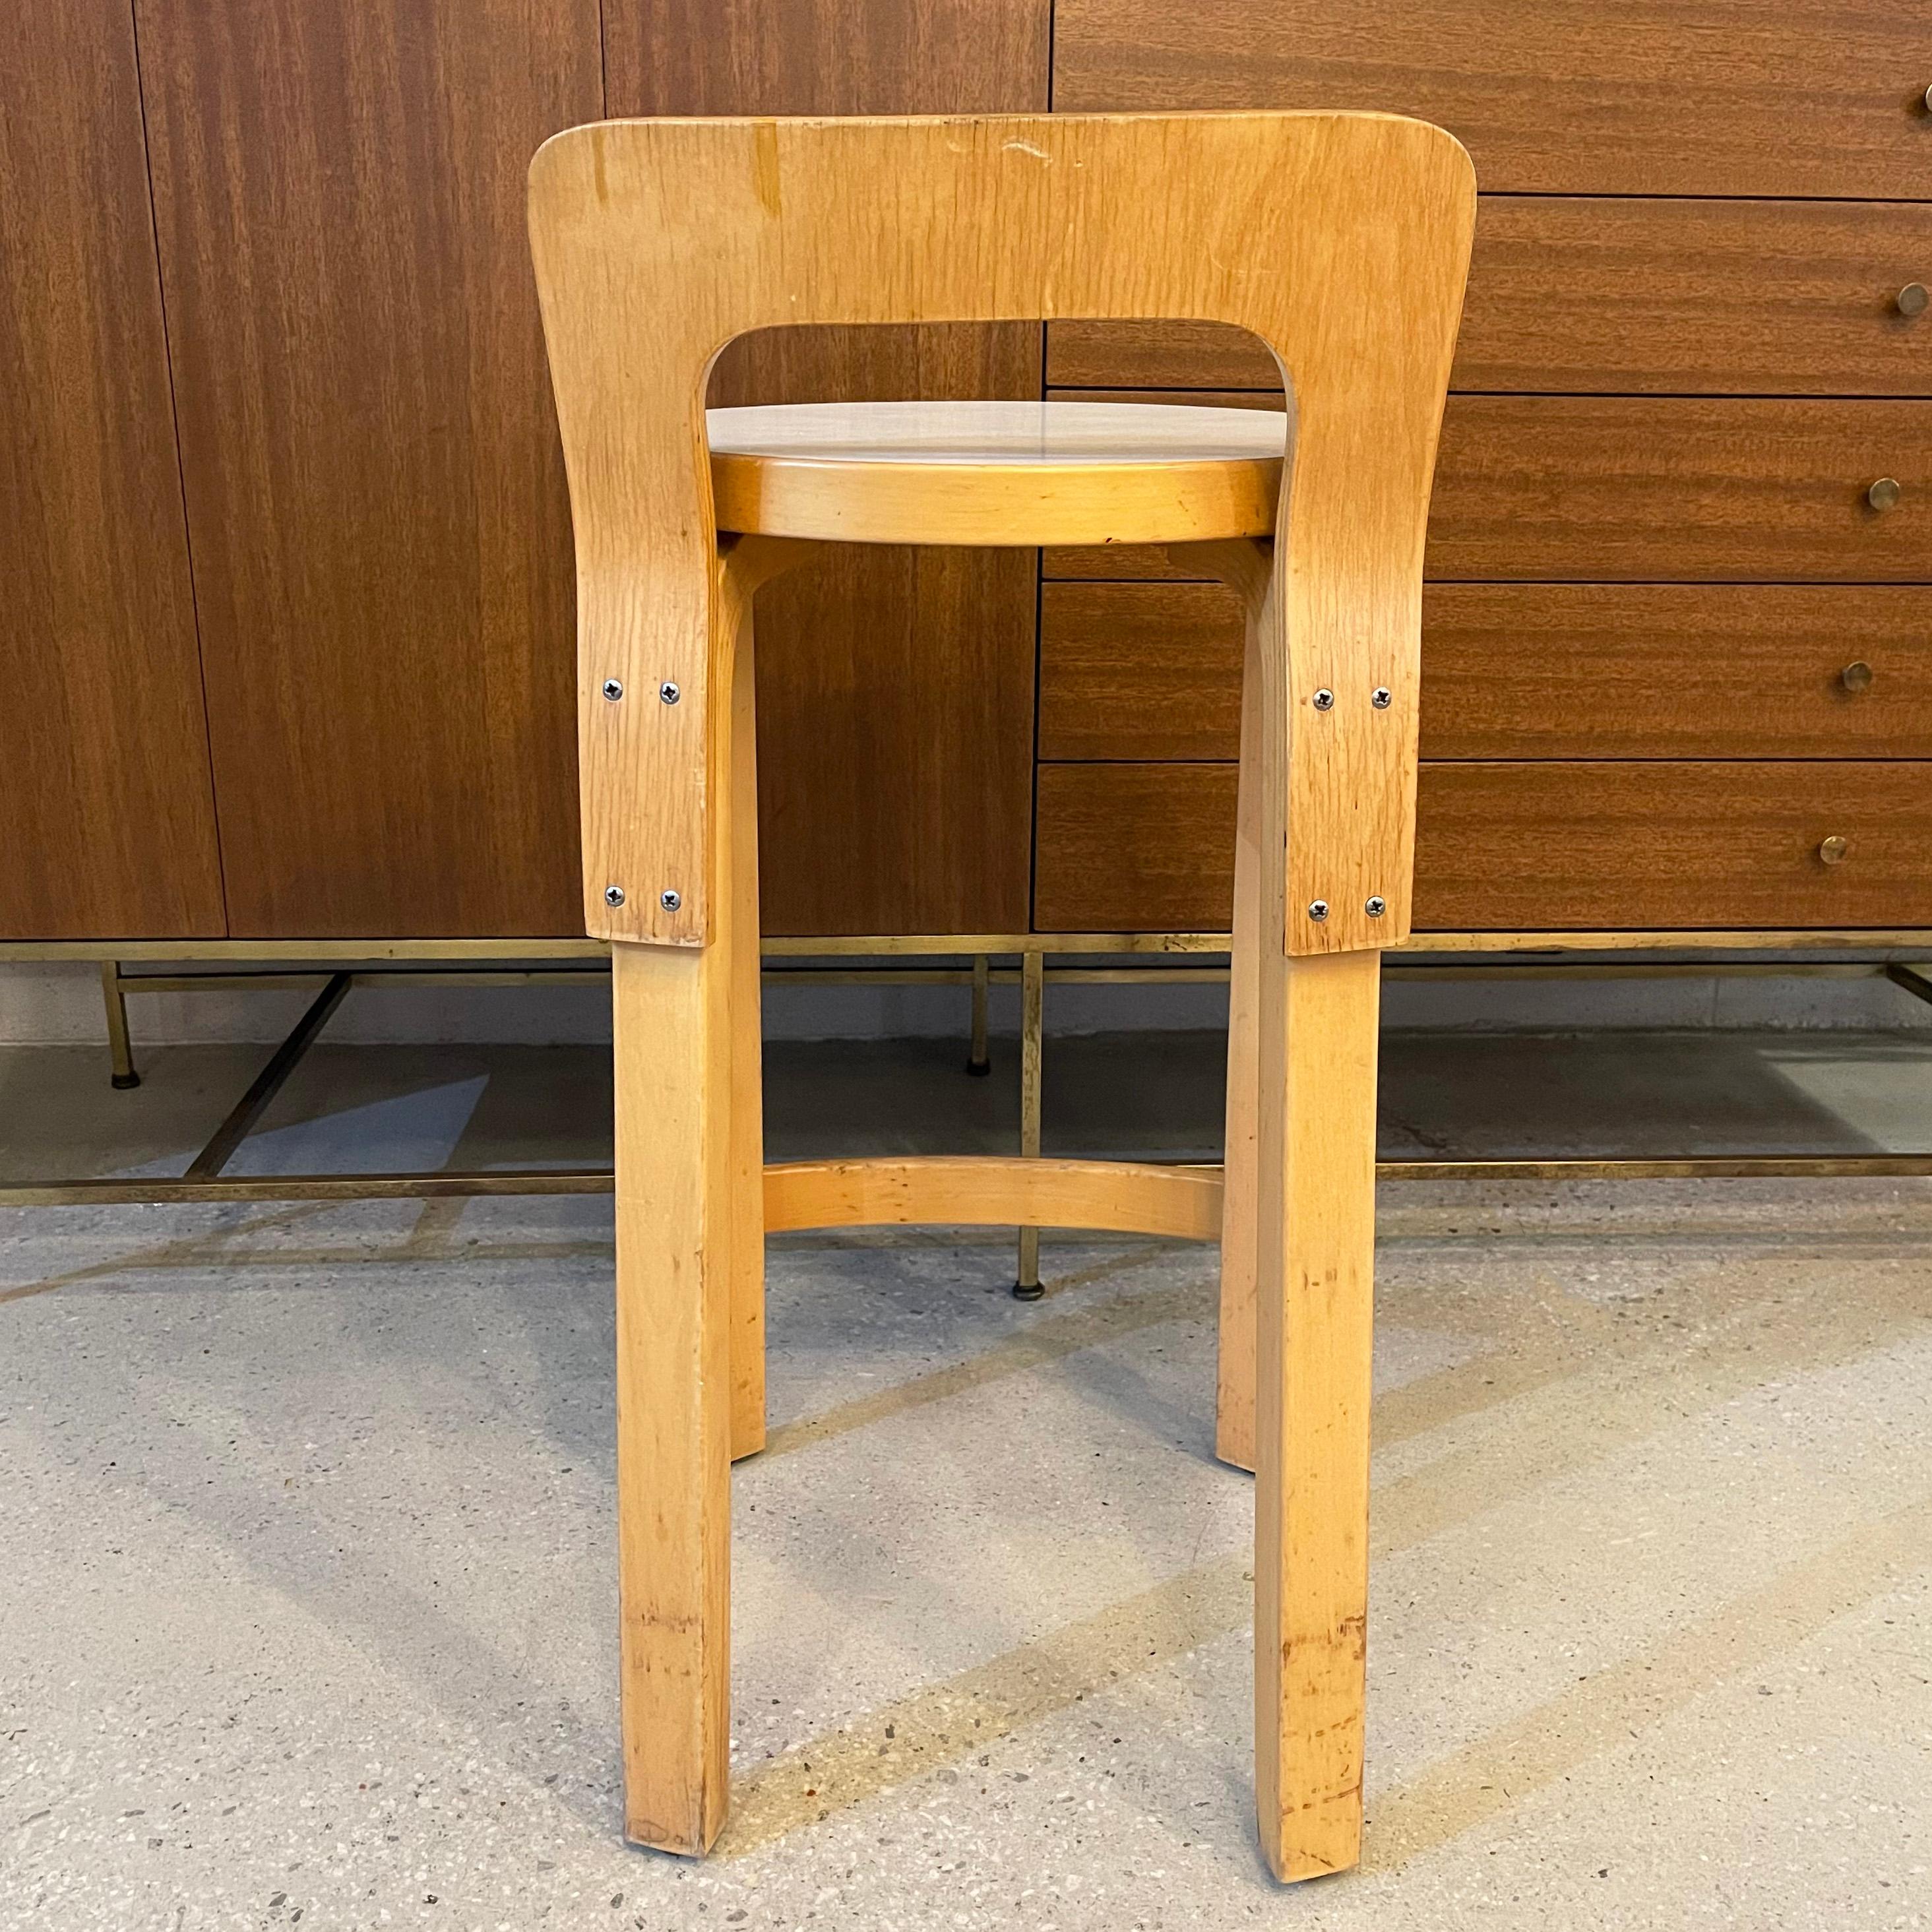 Bent Birch Wood K65 Stool By Alvar Aalto For Artek In Good Condition For Sale In Brooklyn, NY